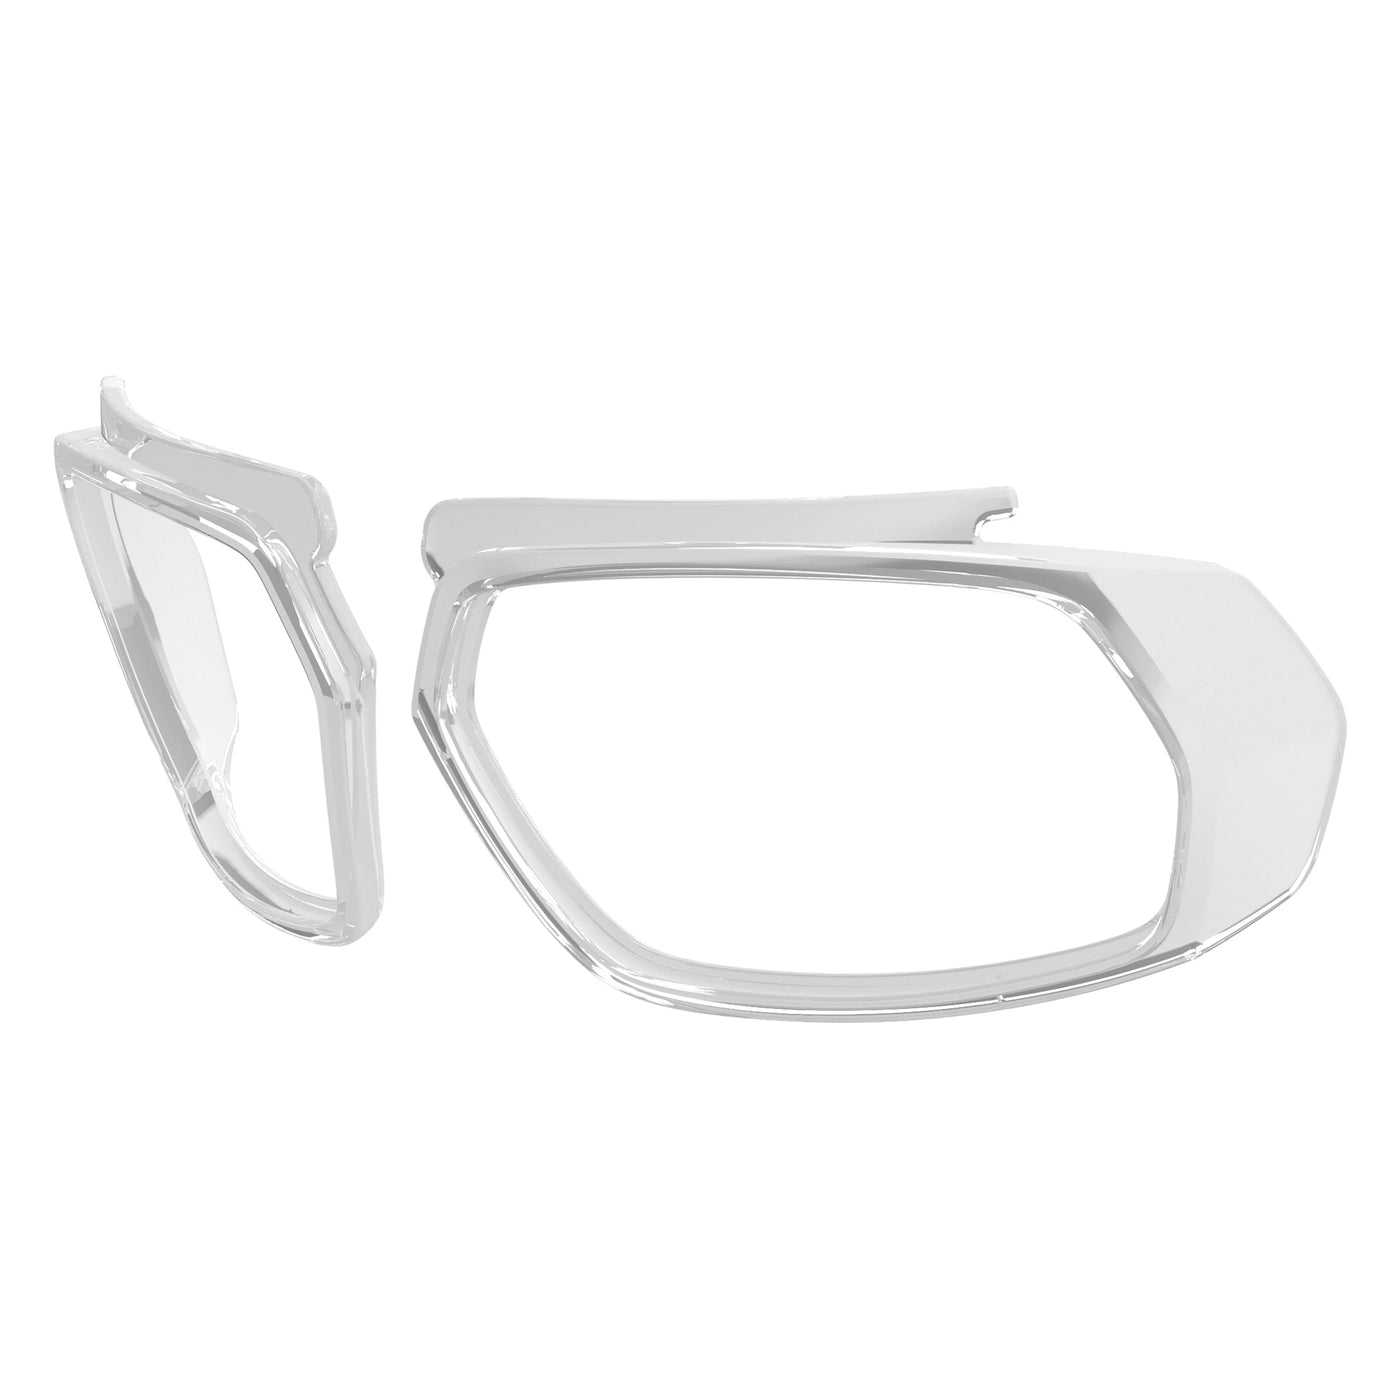 Salice RX Optical Insert for 005 and 019 Clear